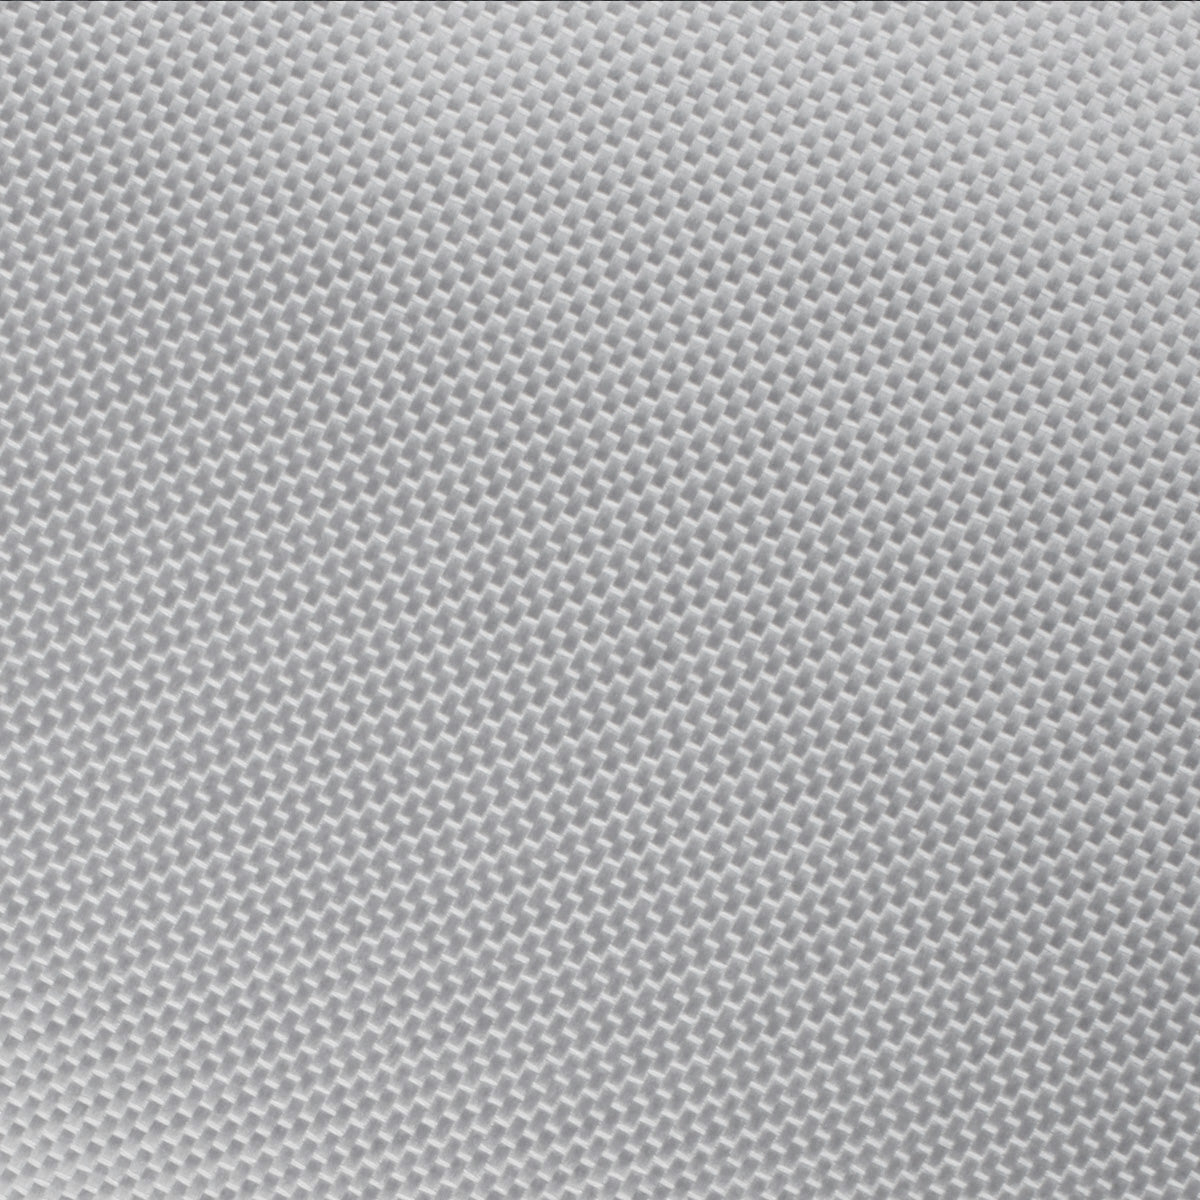 Rustic Light Gray Oxford Weave Pocket Square Fabric